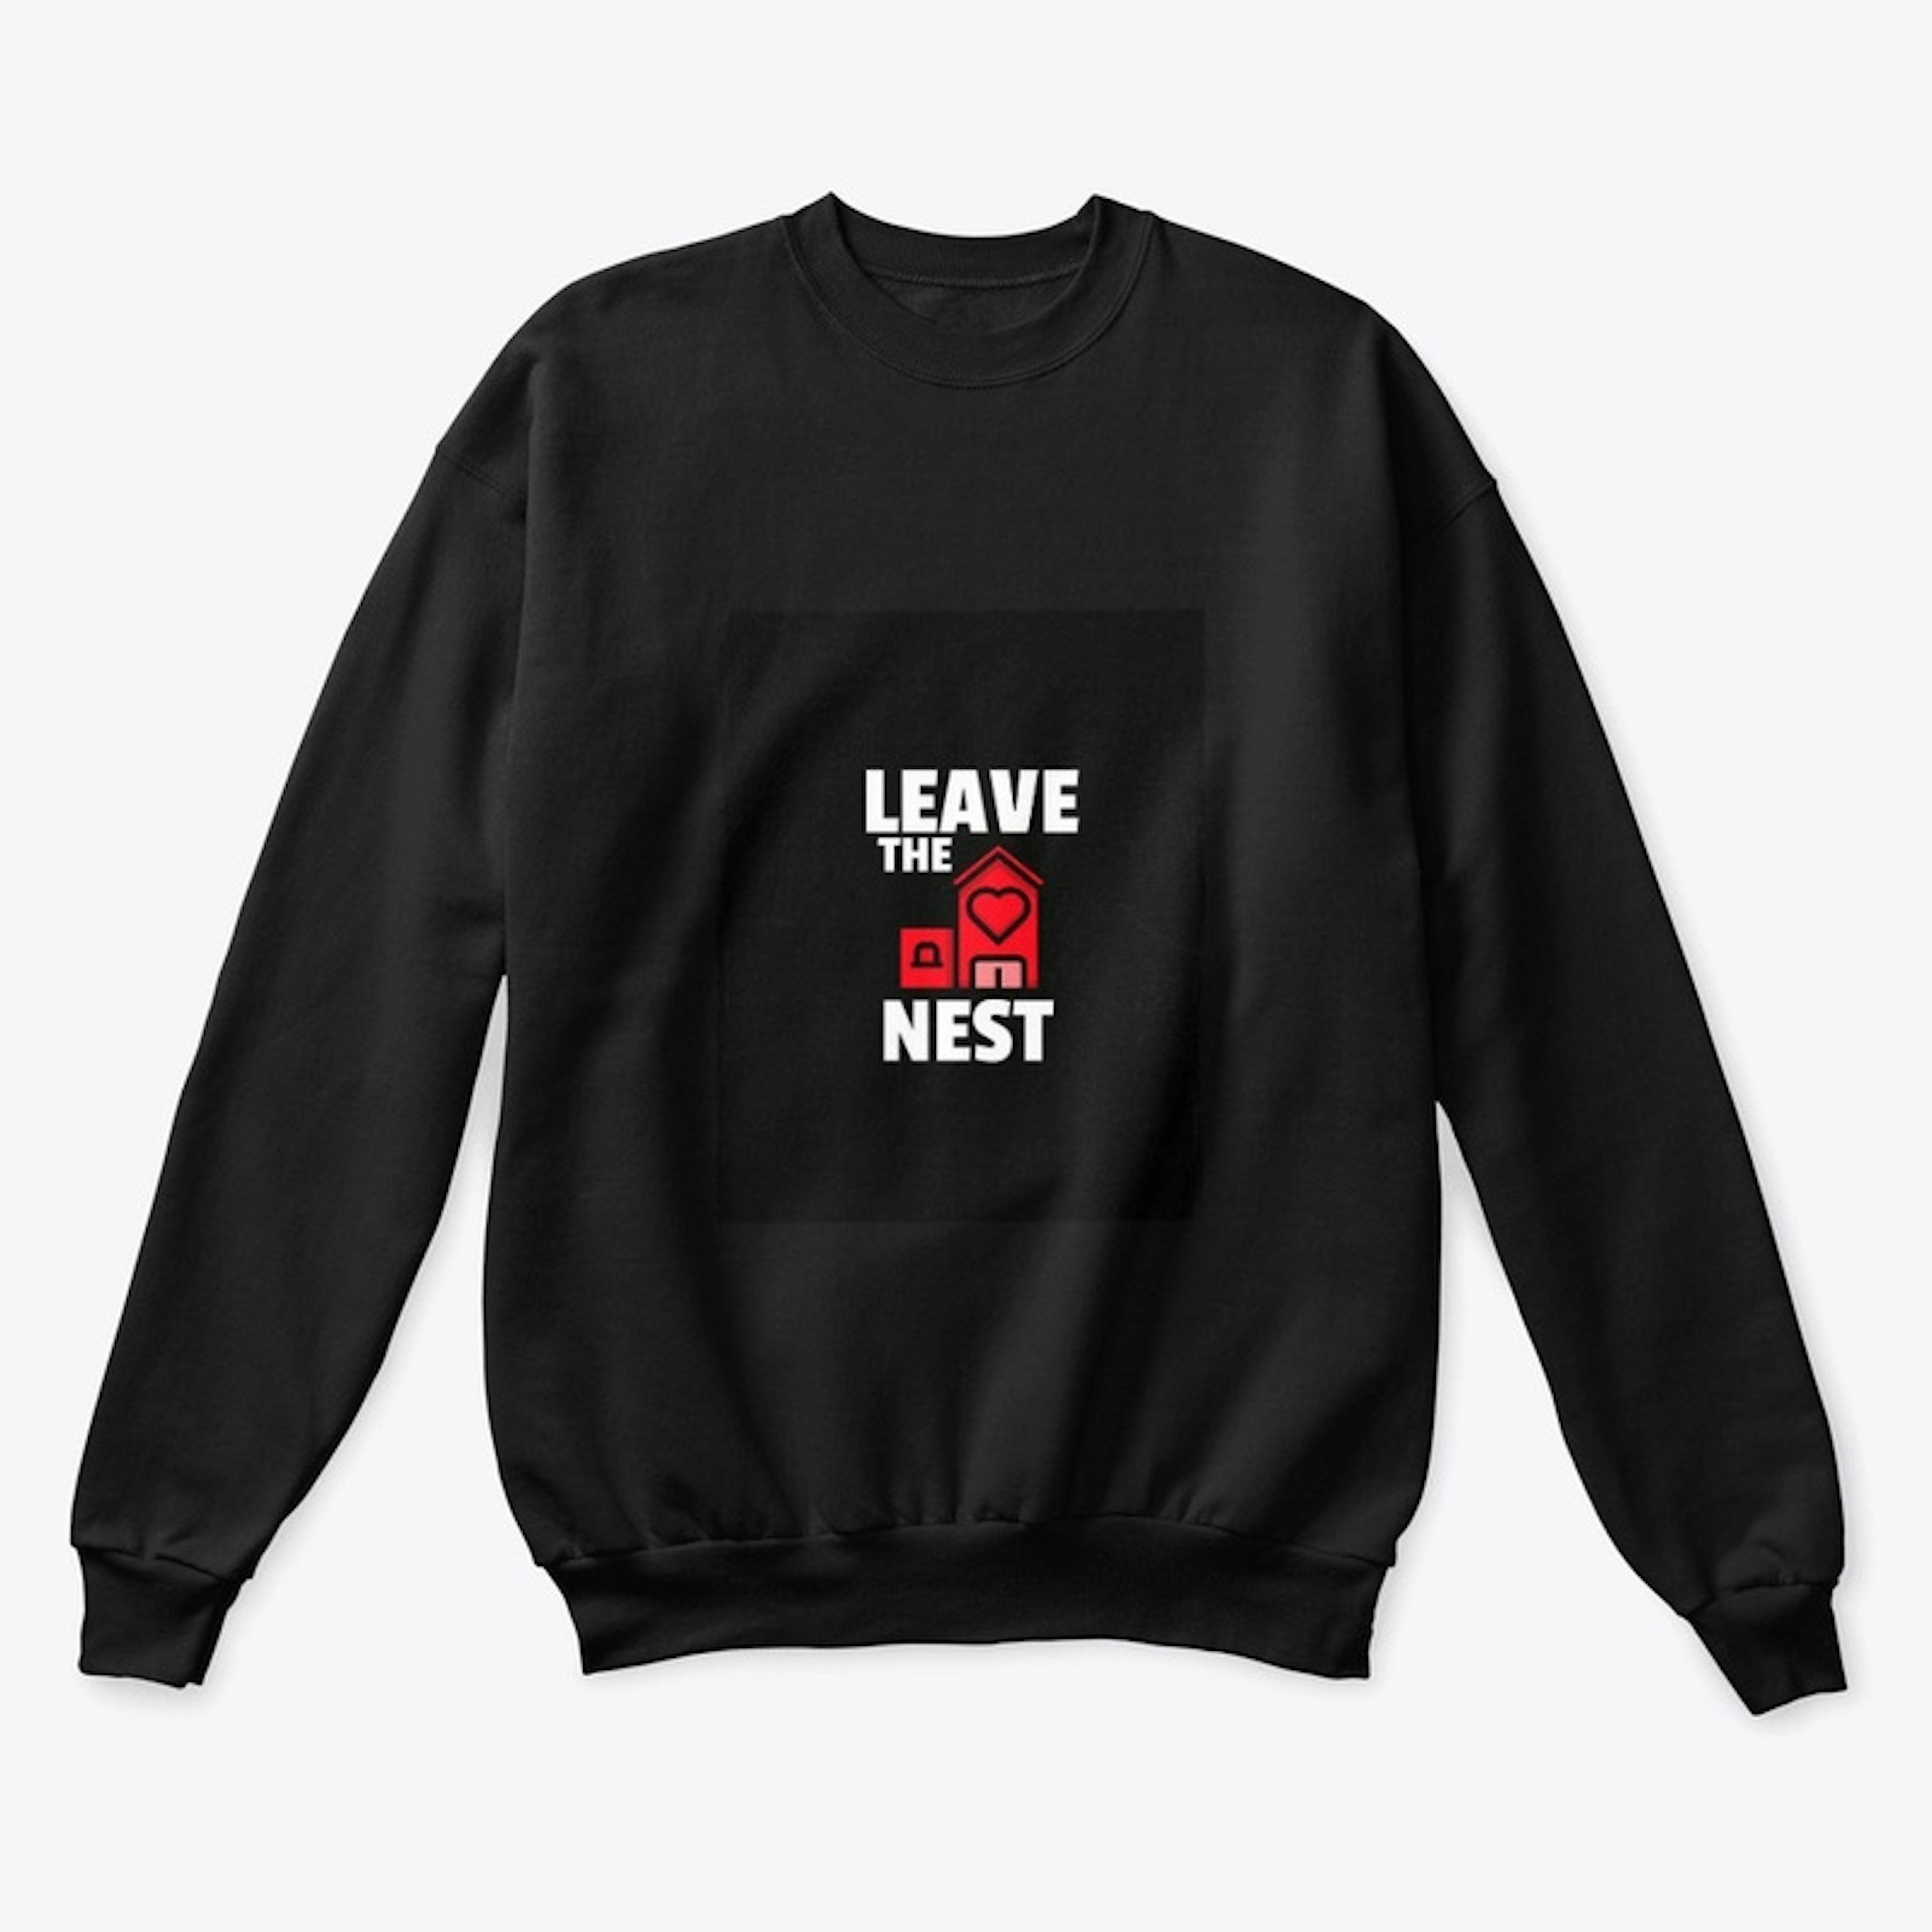 LEAVE THE NEST